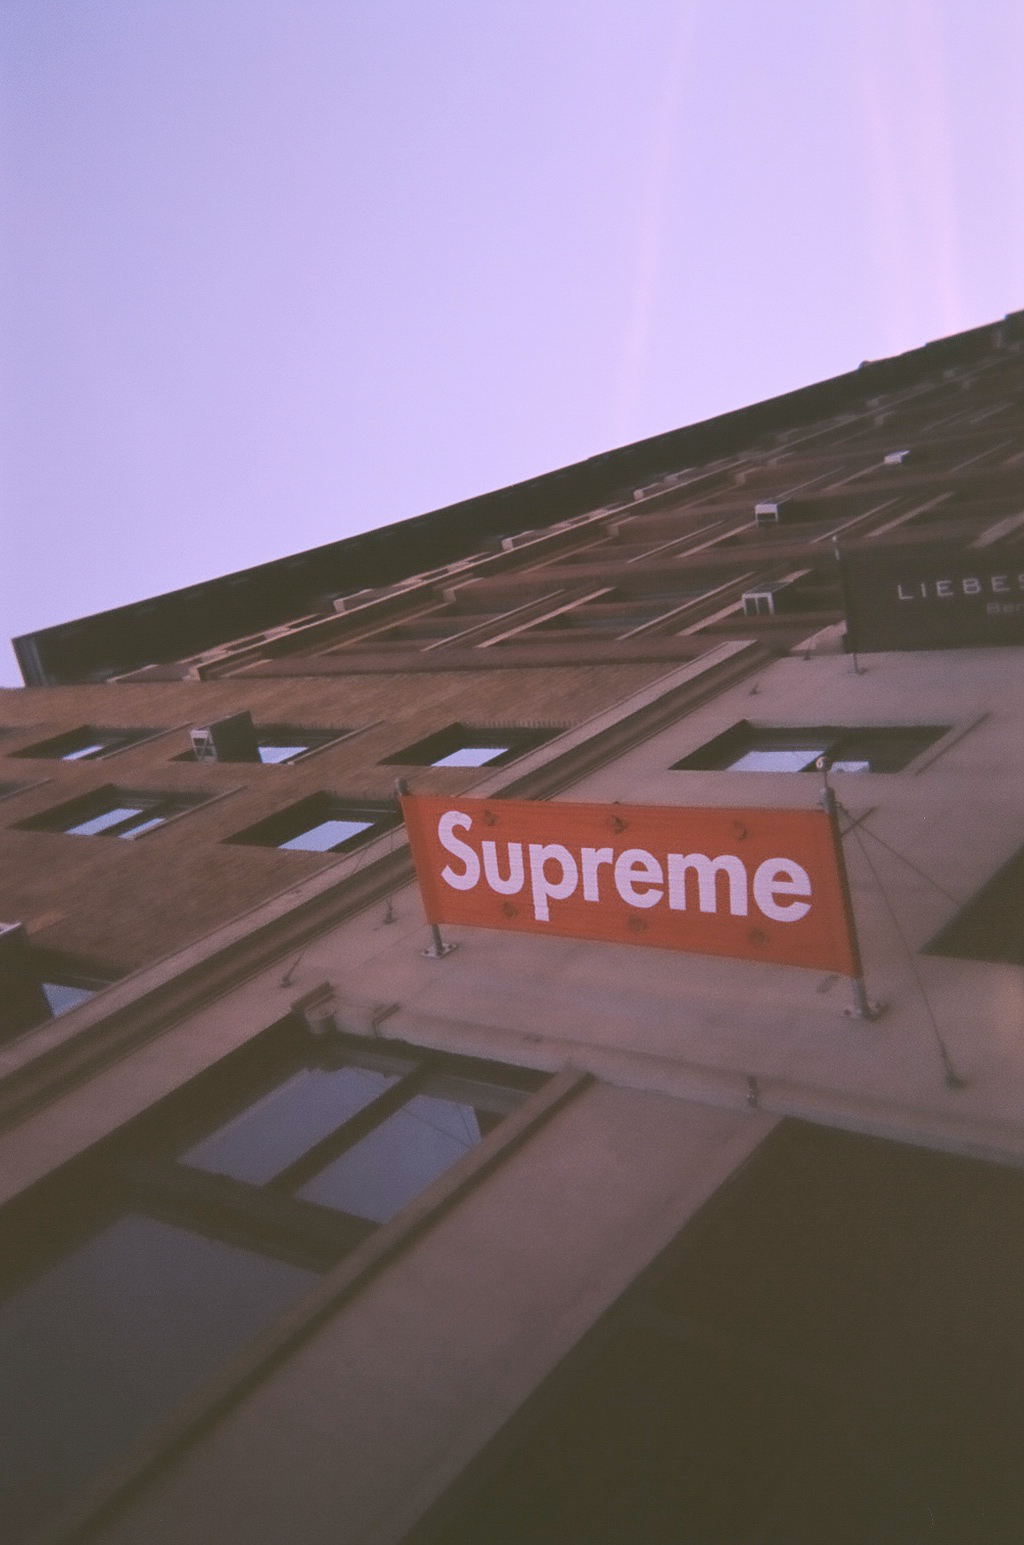 Supreme Wallpaper Iphone 5 To the supreme flagship on